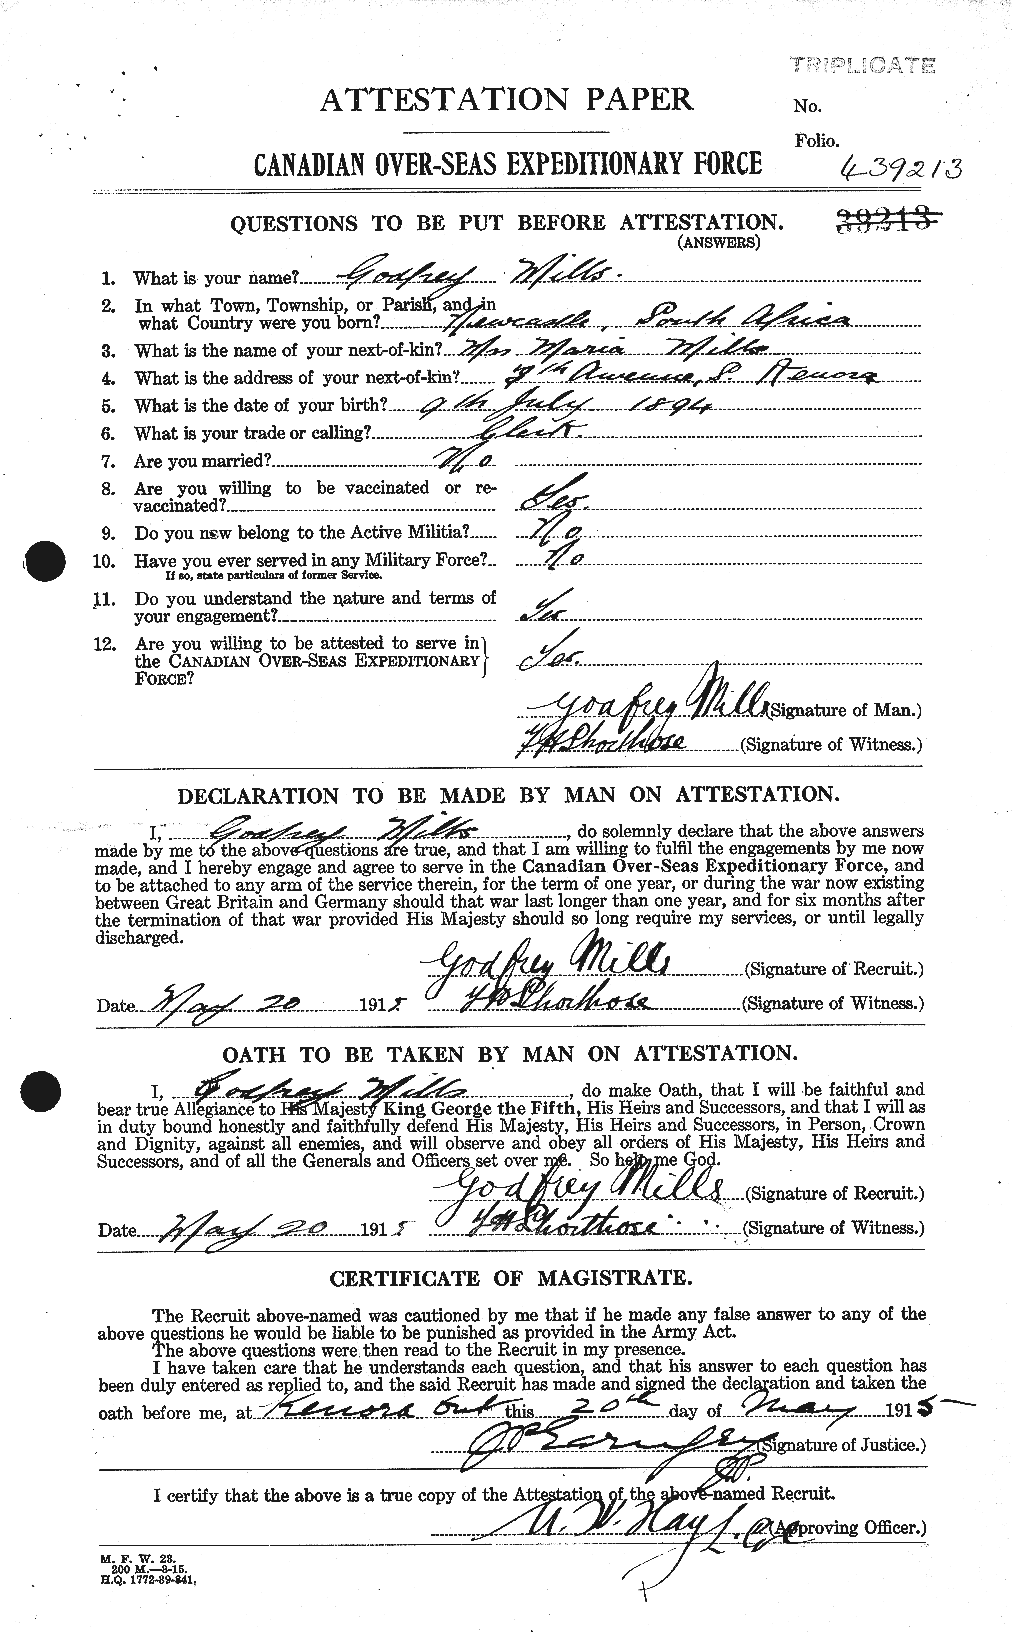 Personnel Records of the First World War - CEF 498220a